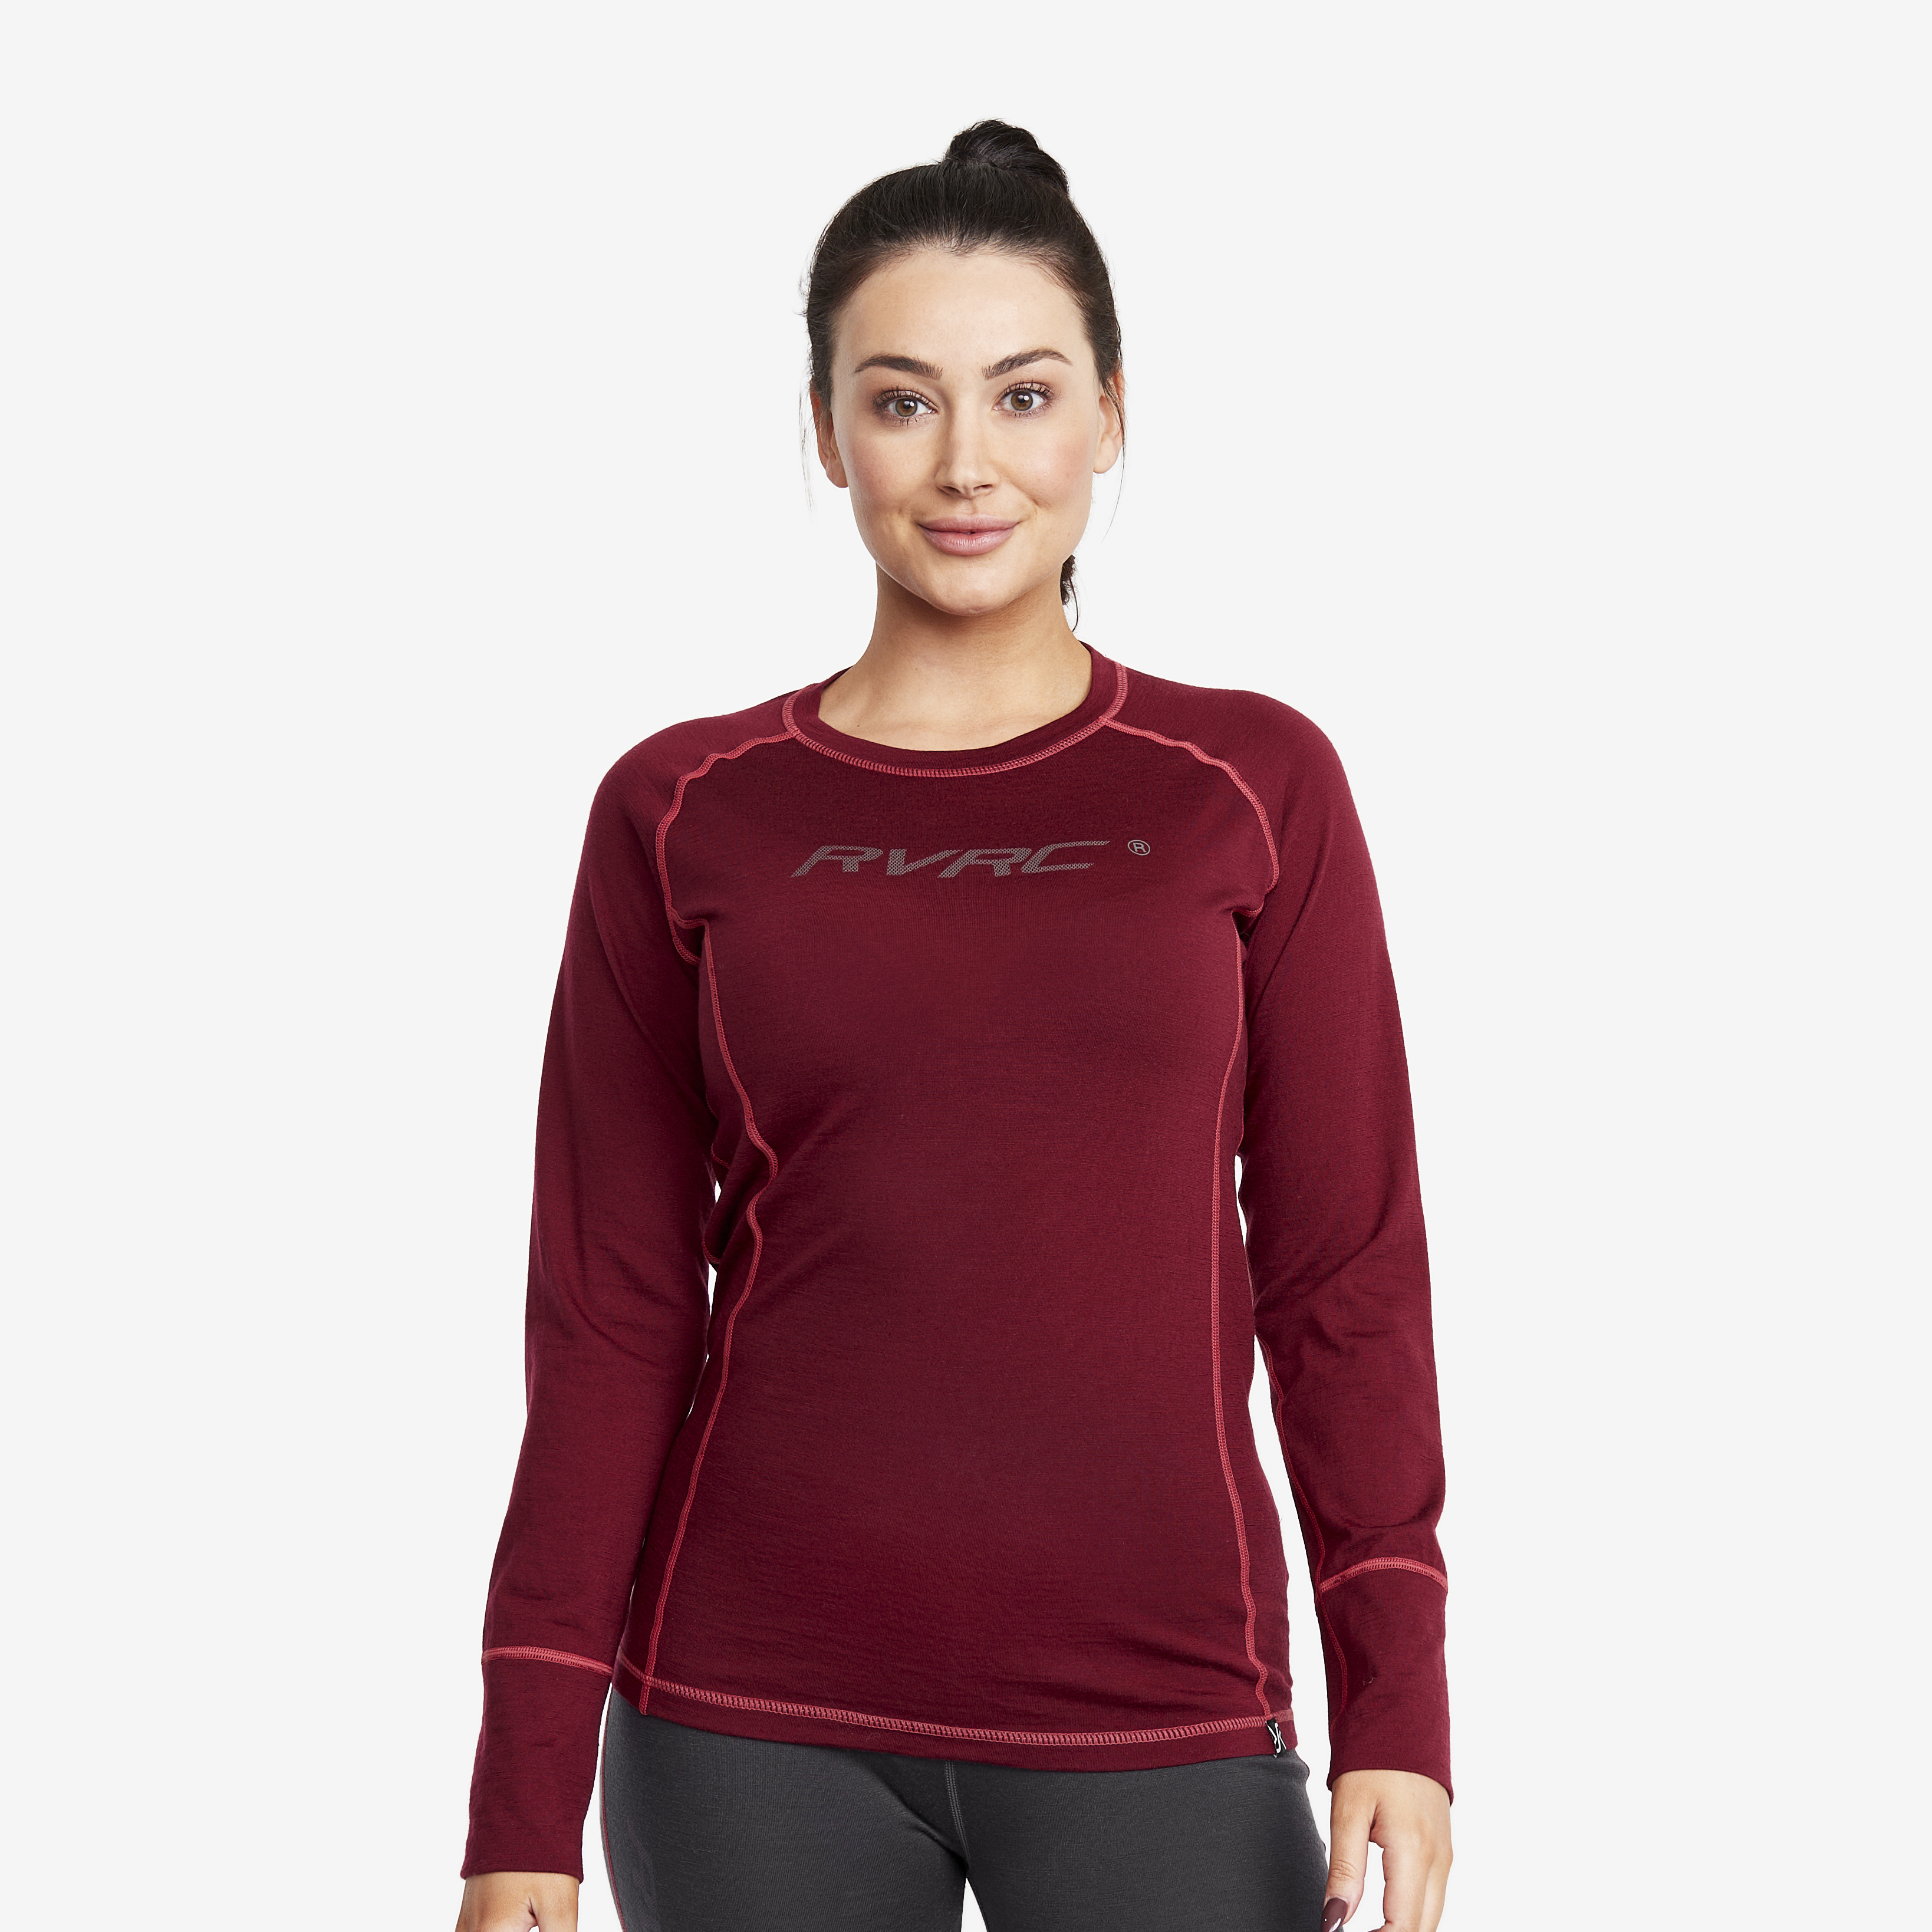 Outright Merino Top Bison Red/ Anthracite Femme